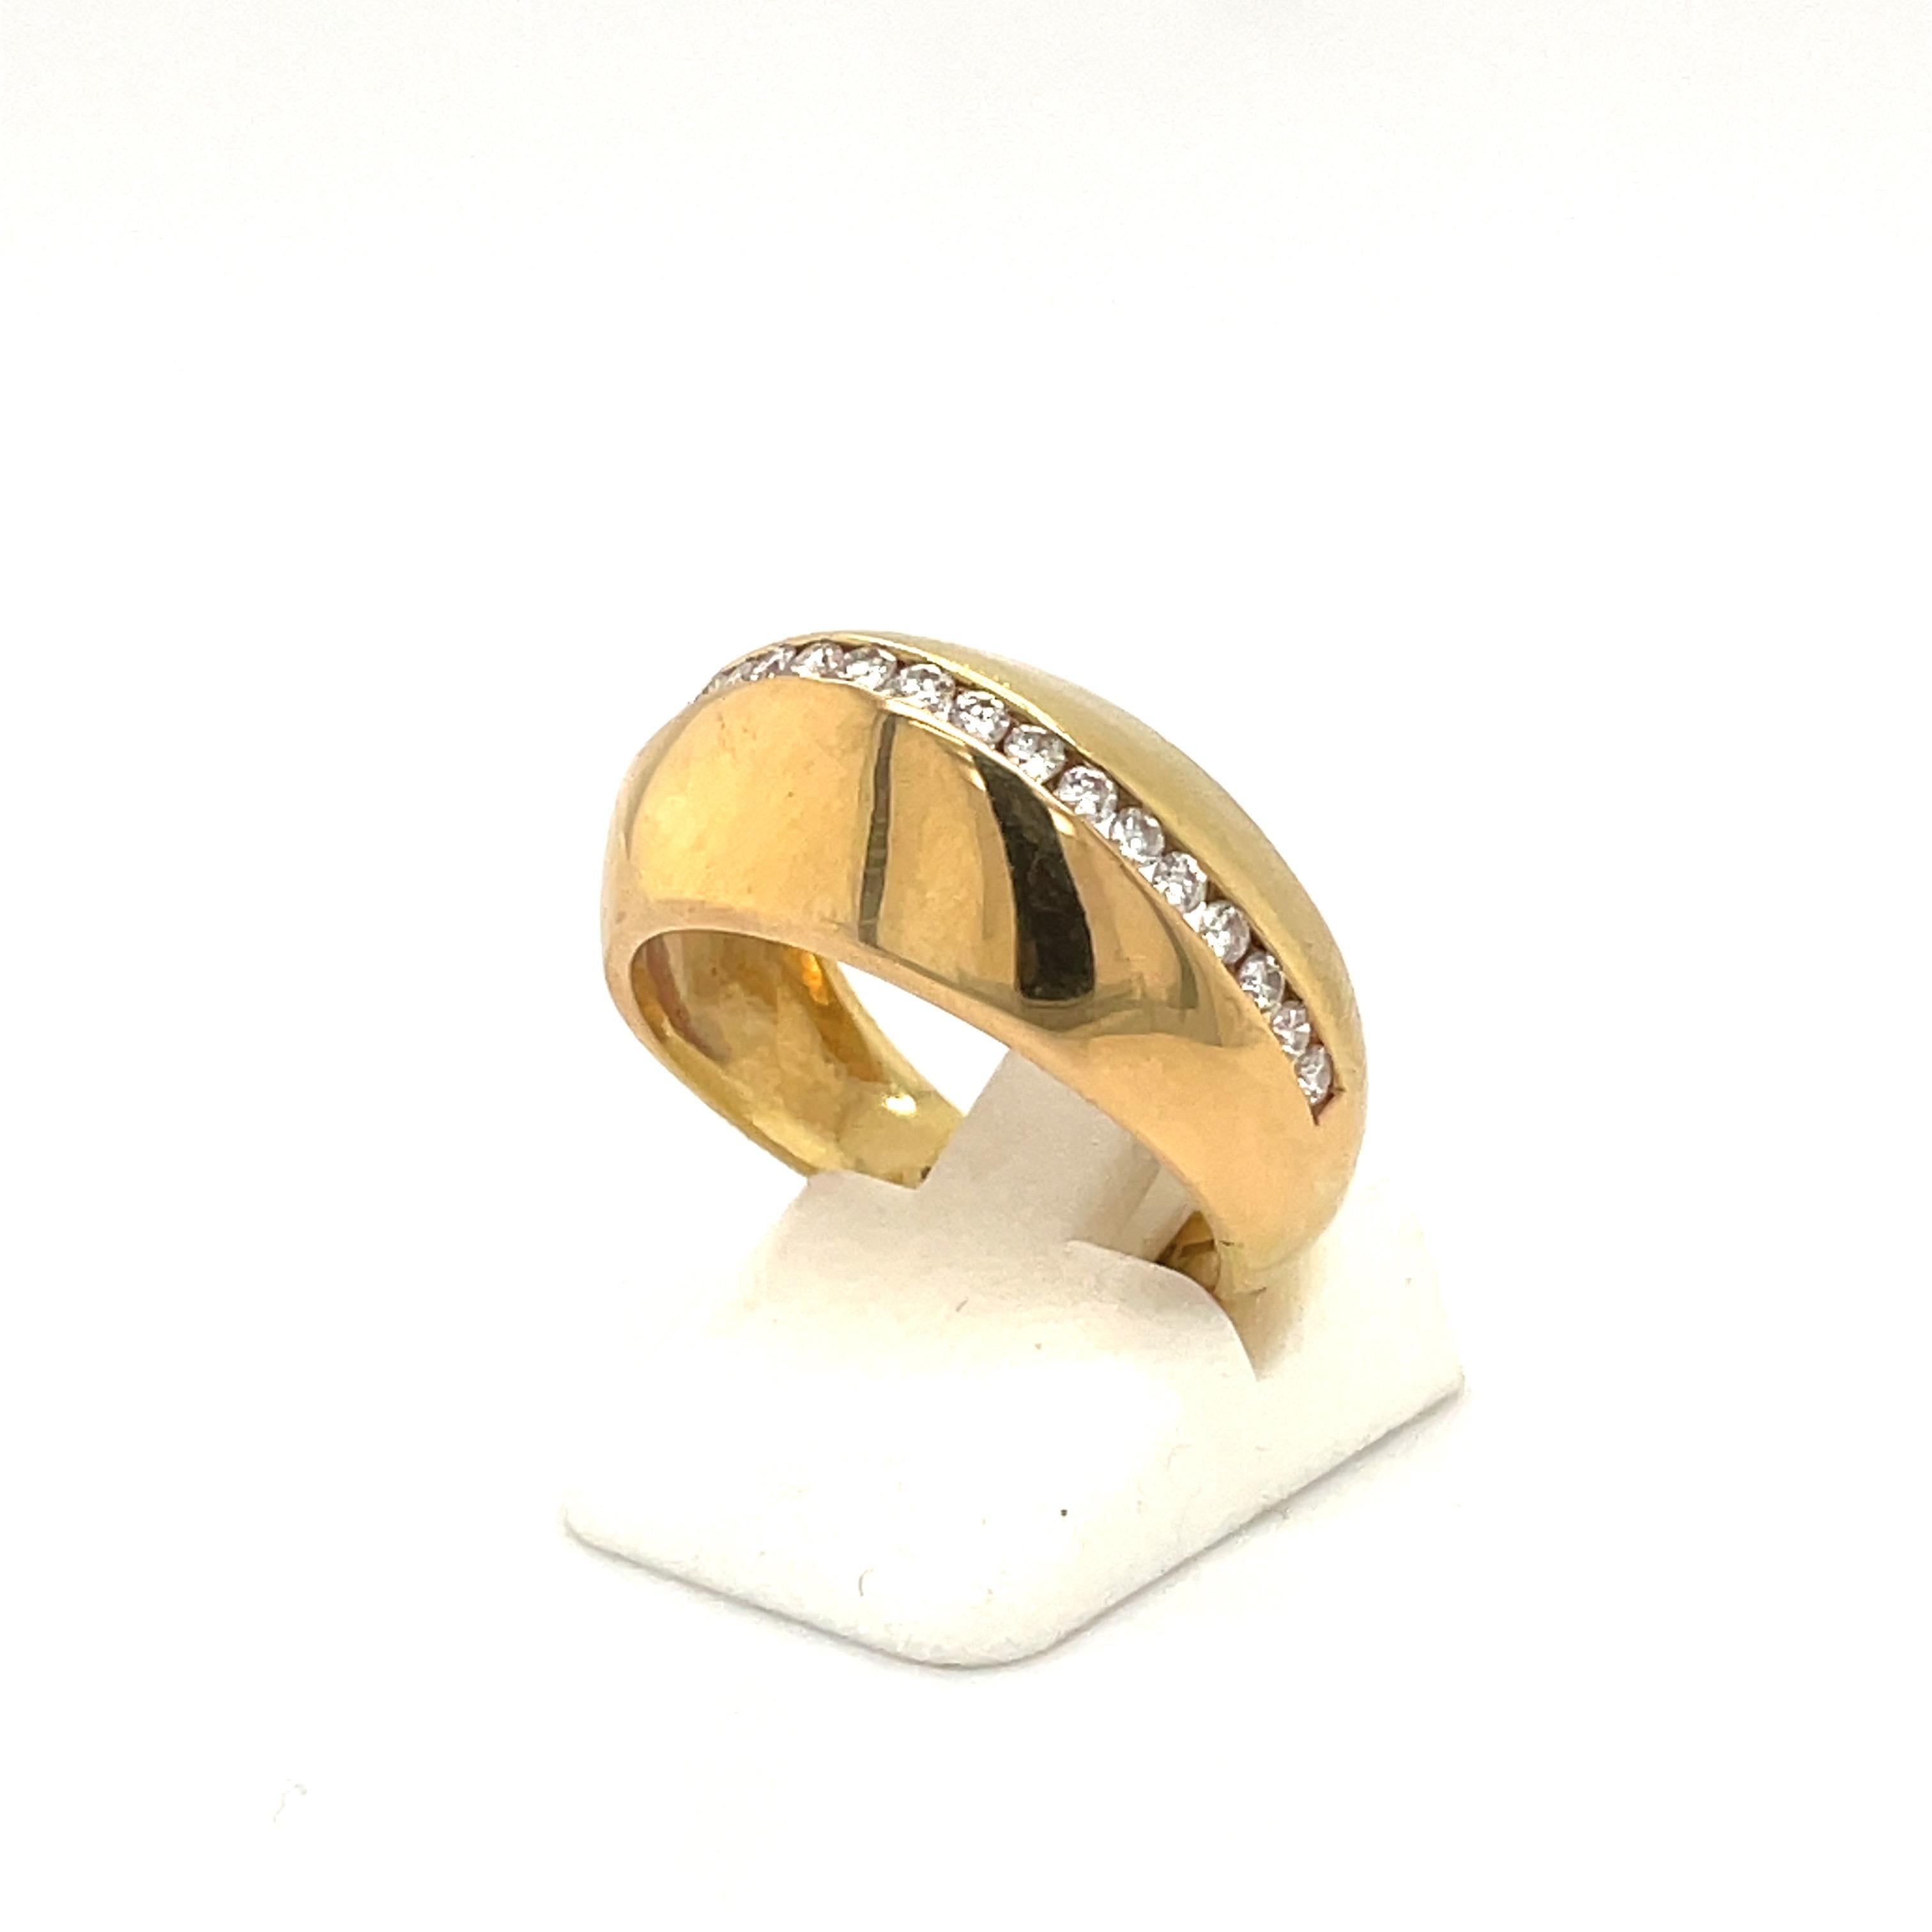 A classic dome style 18 karat yellow gold high polished dome ring. The center of the ring has a single row of round brilliant diamonds.
Total diamond weight 0.63 carats
Ring size 7.5 sizing may be available
Stamped 750